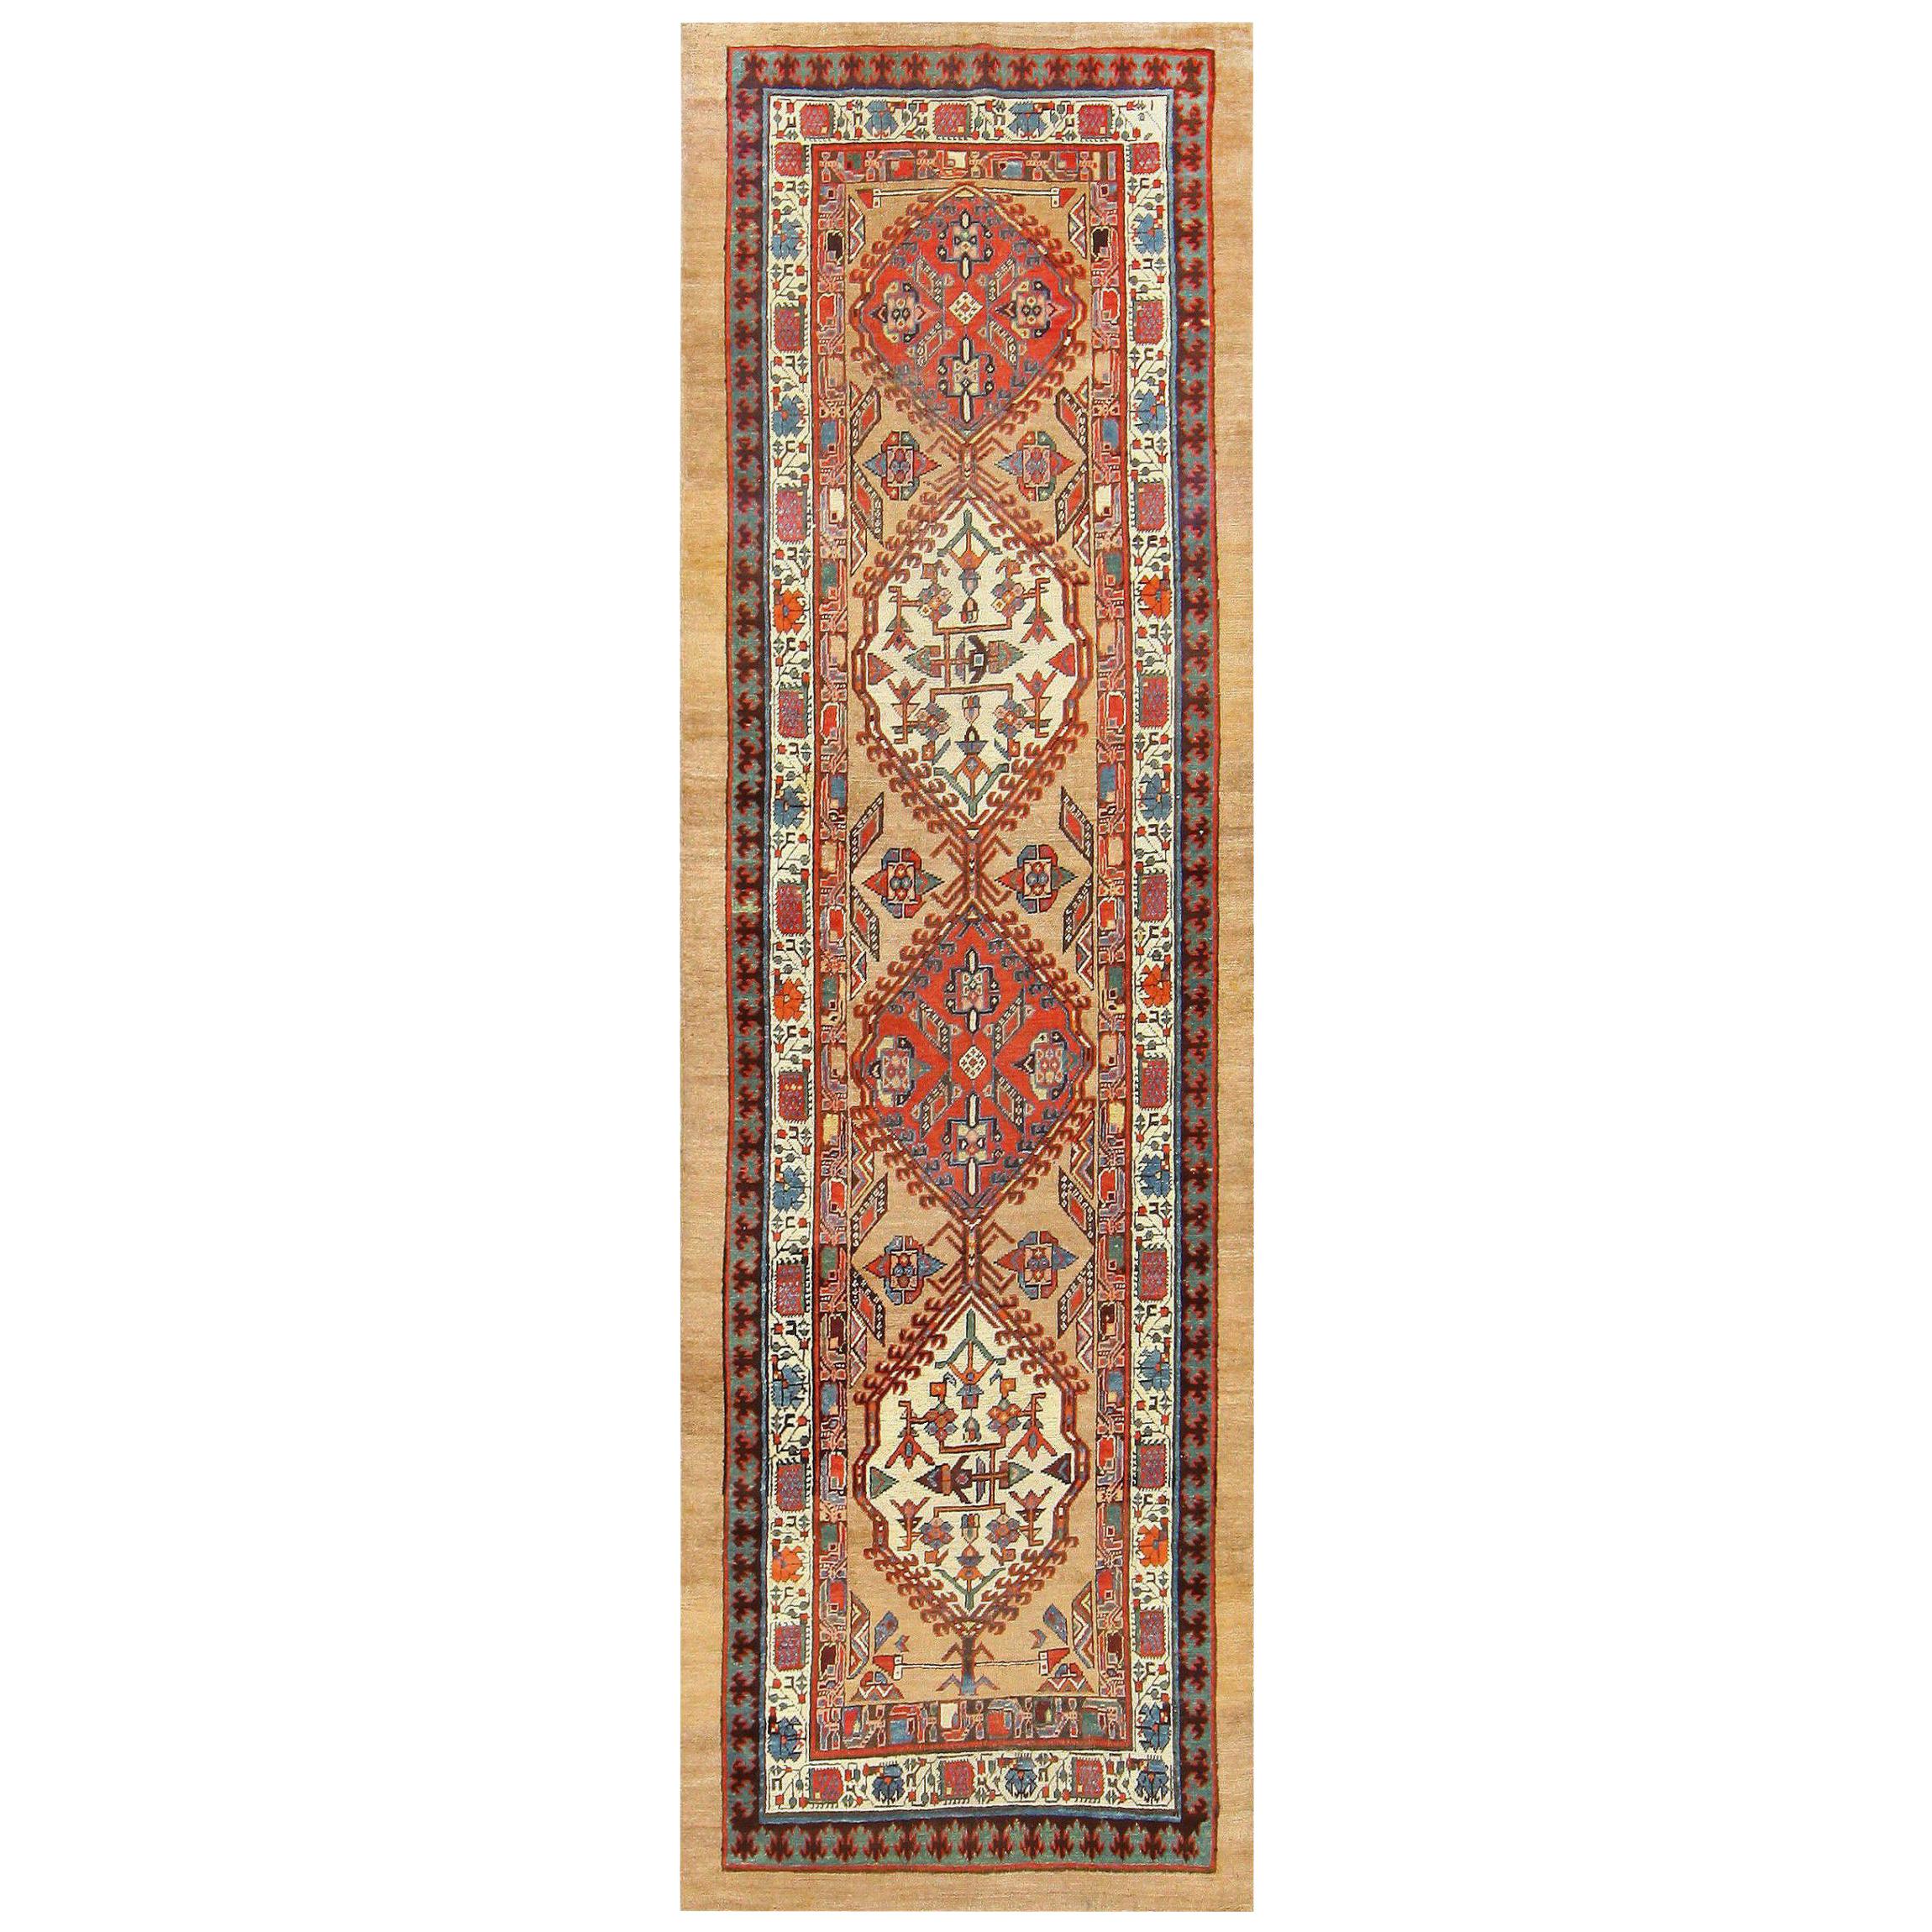 Antique Persian Serab Runner Rug. Size: 4 ft x 12 ft 10 in (1.22 m x 3.91 m)